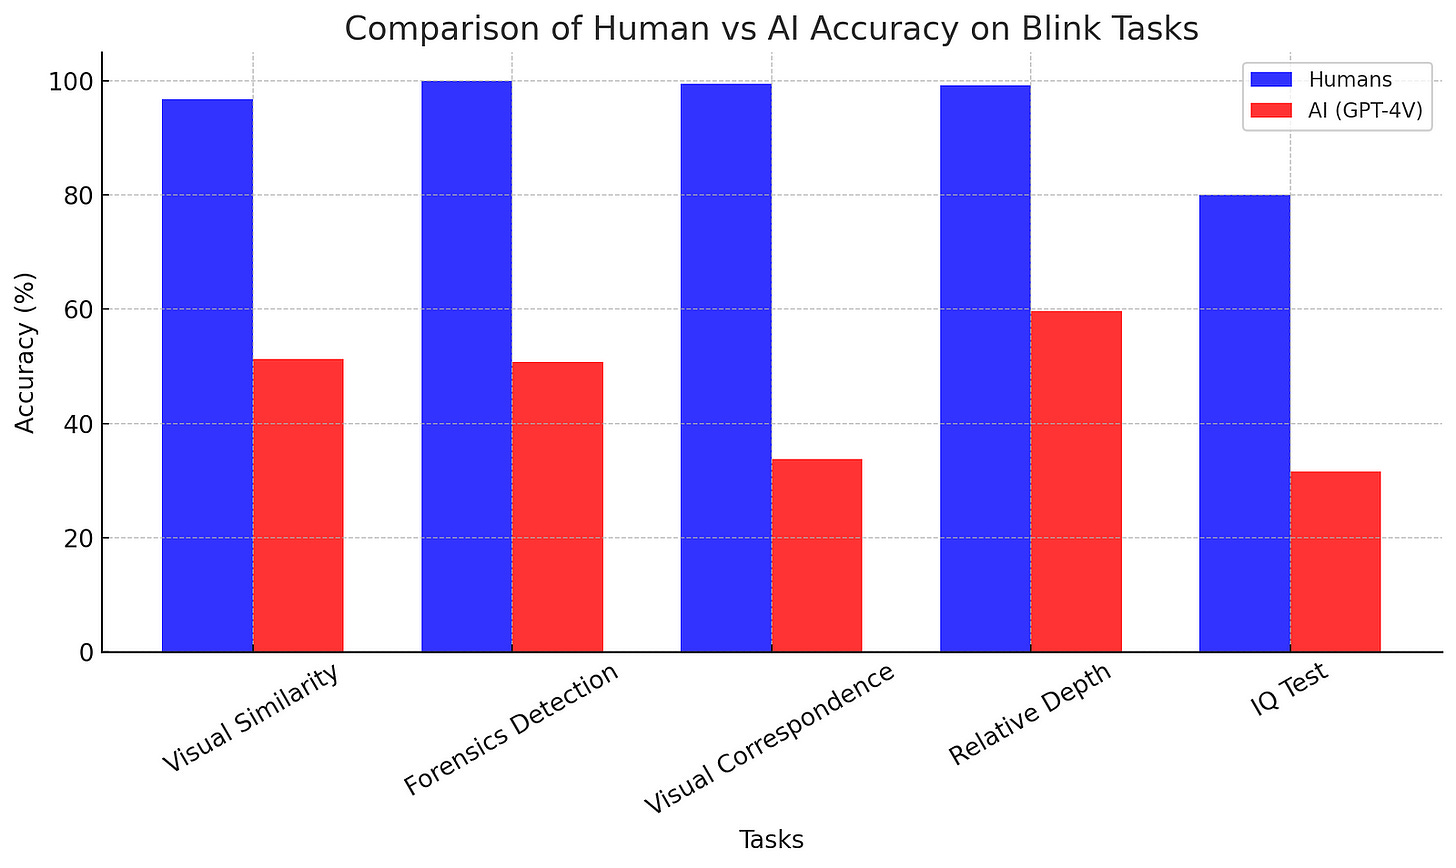 Bar chart comparing human and AI (GPT-4V model) accuracy percentages across five Blink benchmark tasks: Visual Similarity, Forensics Detection, Visual Correspondence, Relative Depth, and IQ Test. Humans significantly outperform AI in all categories.